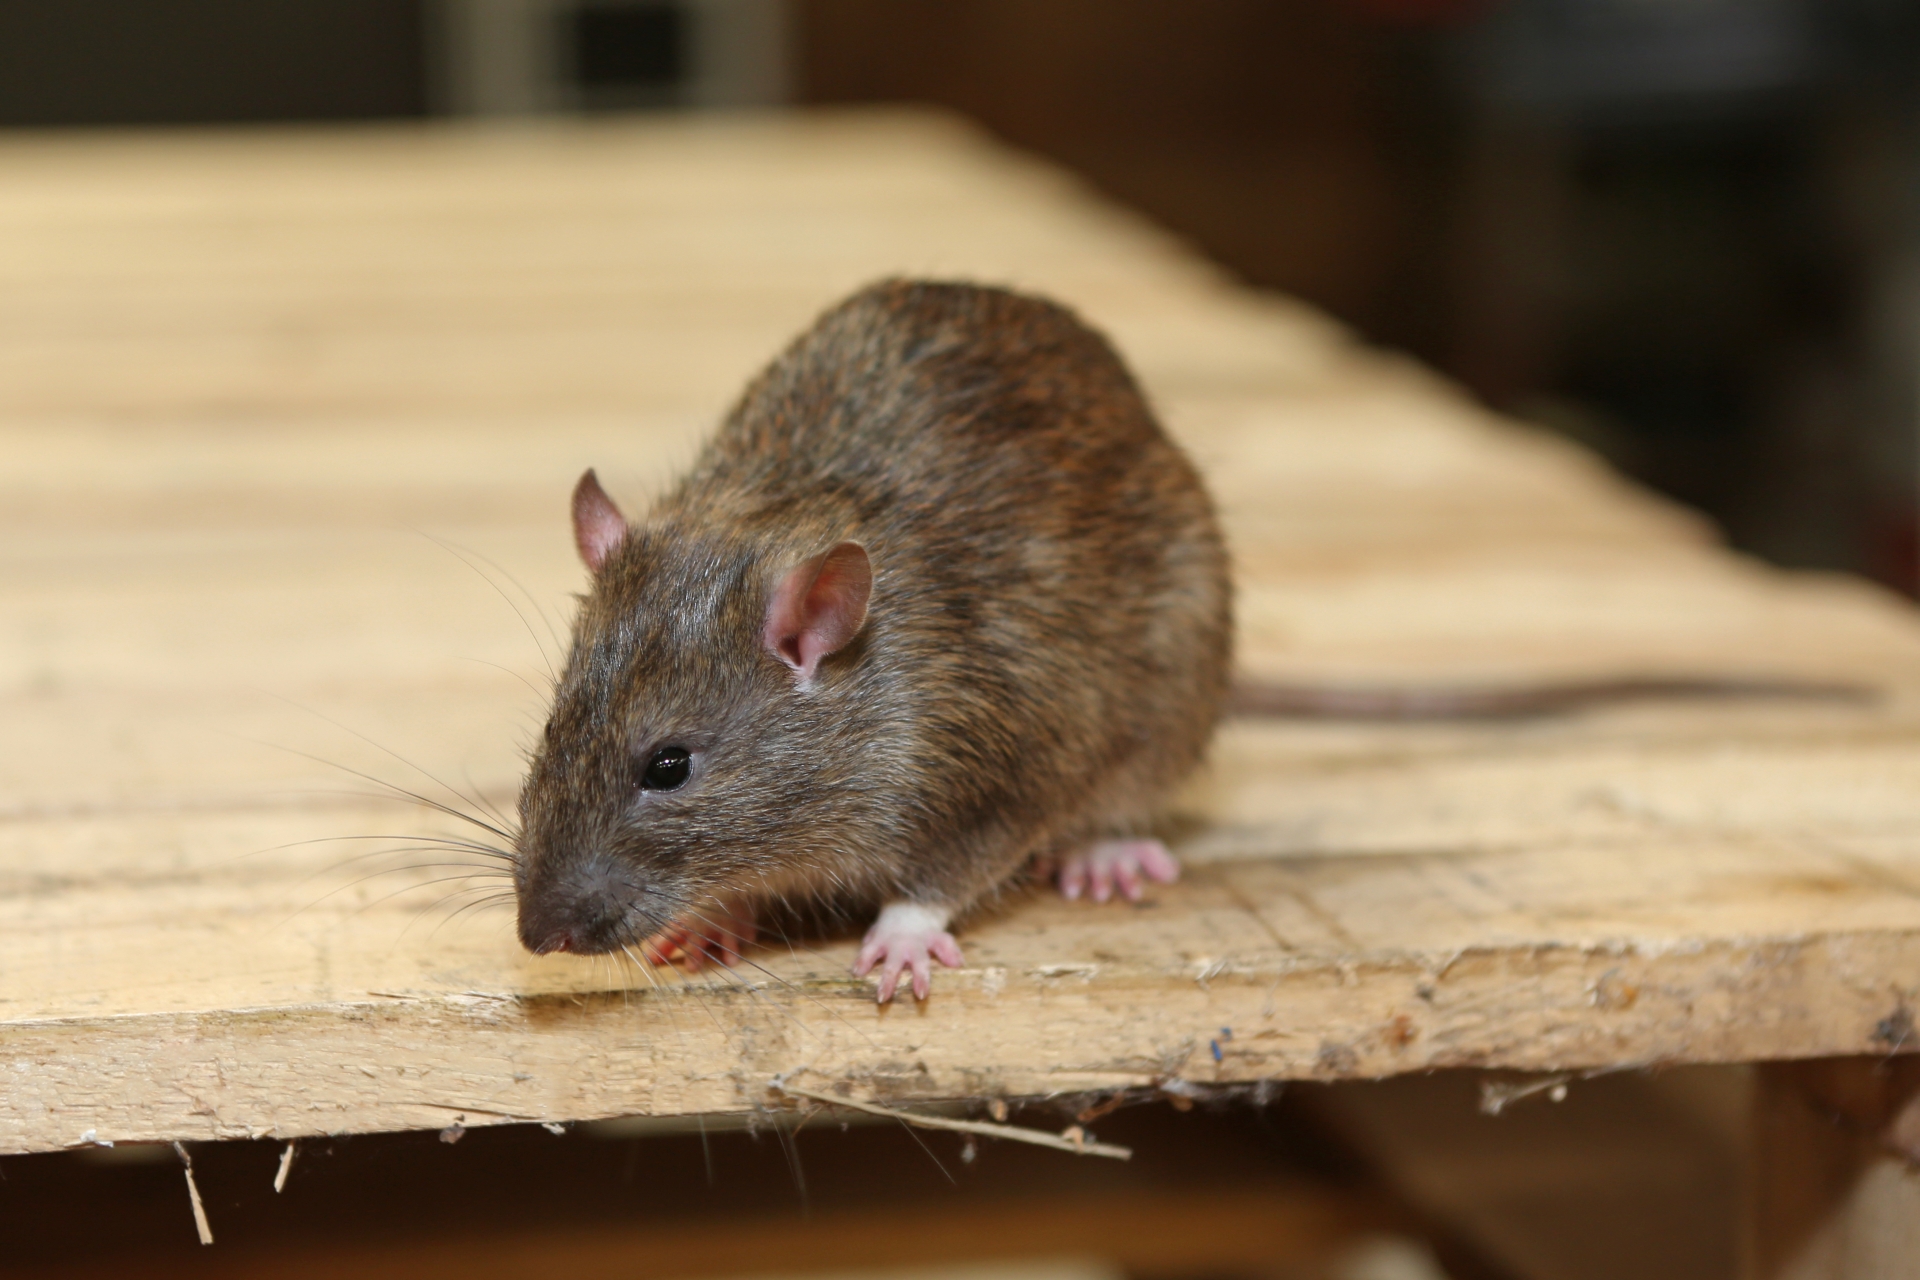 Rat Infestation, Pest Control in Mayfair, Marylebone, W1. Call Now 020 8166 9746